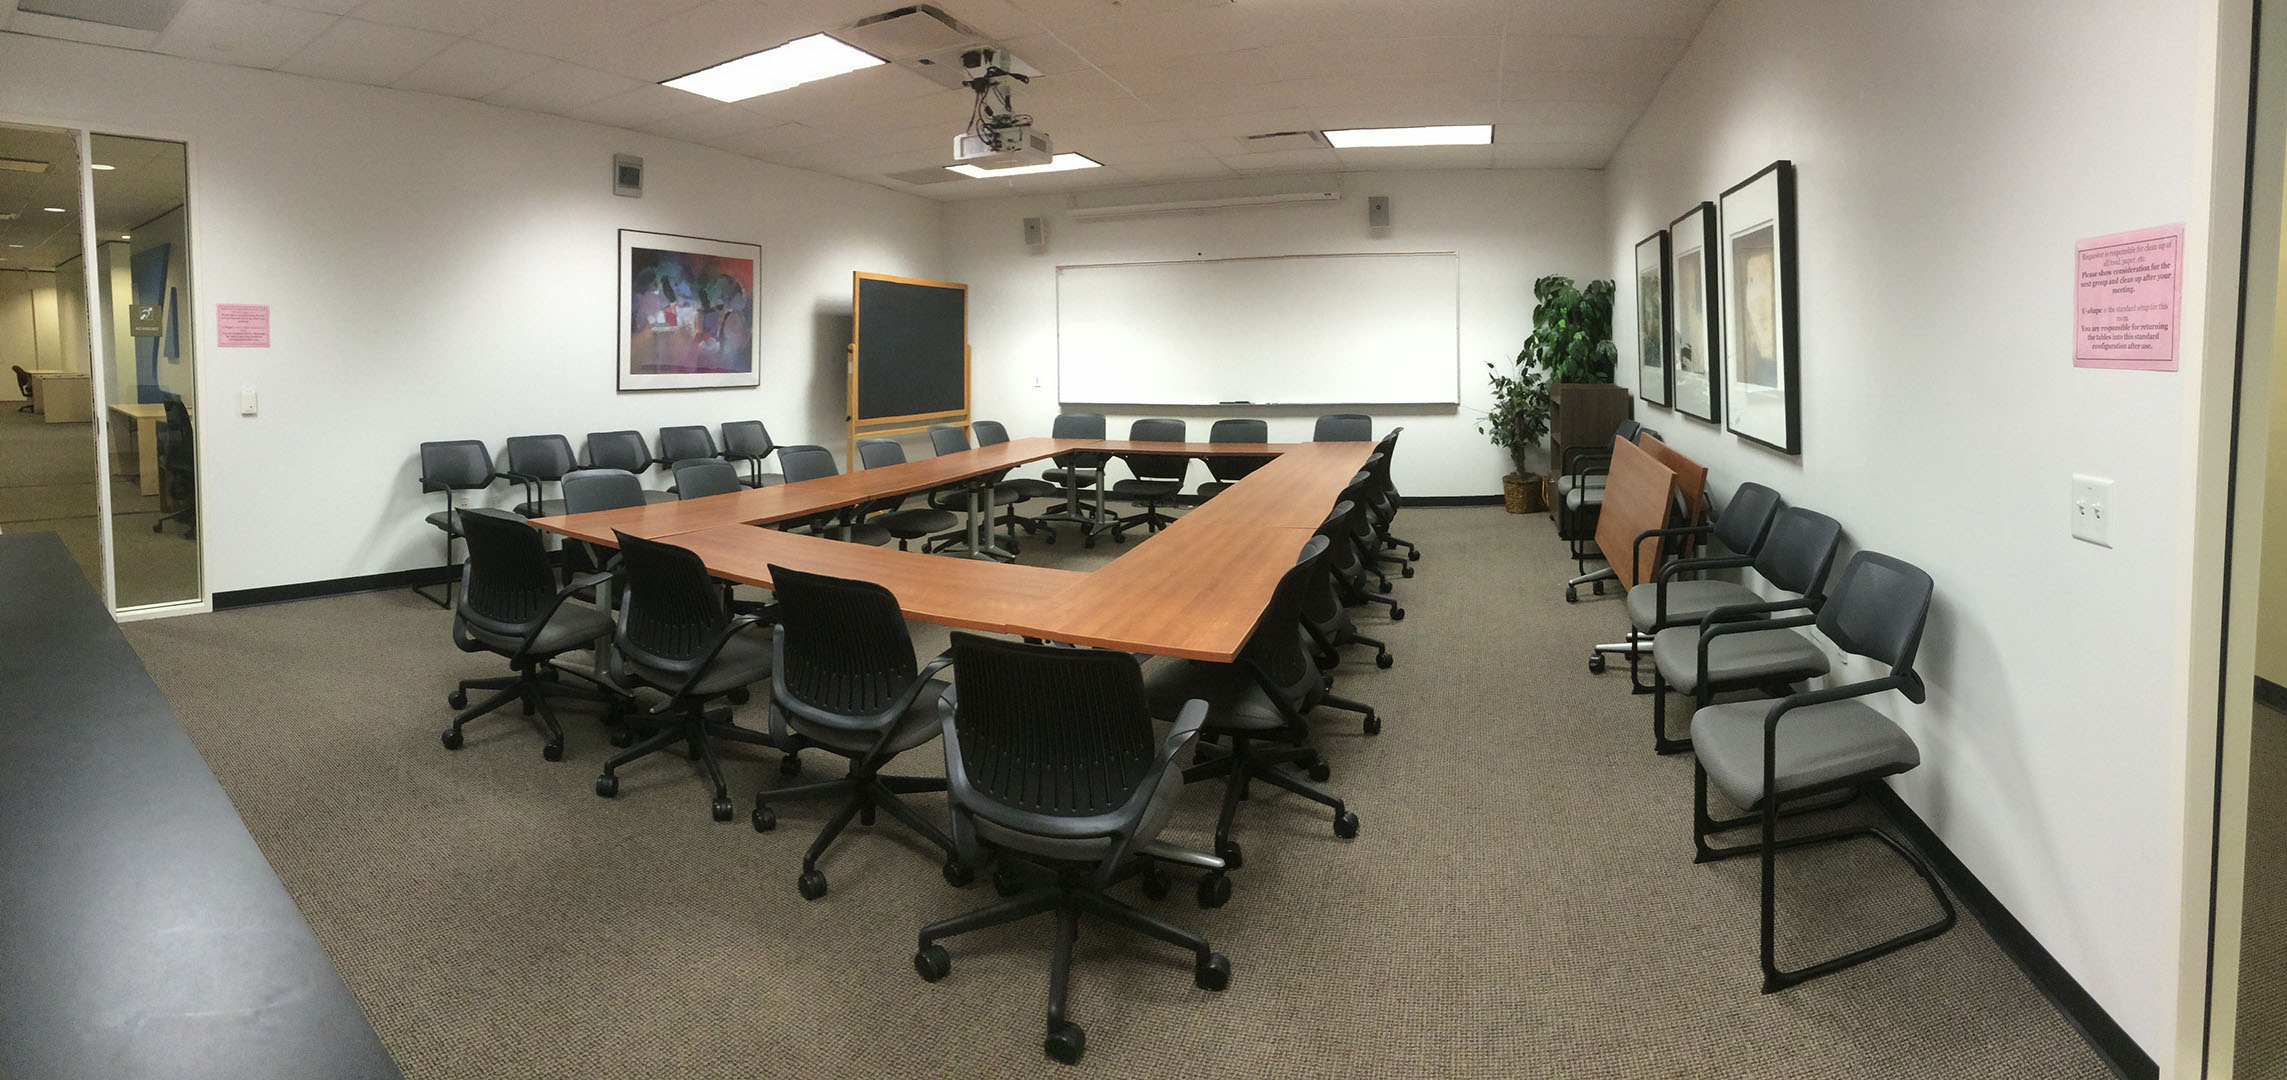 Lower right side view of empty meeting room.